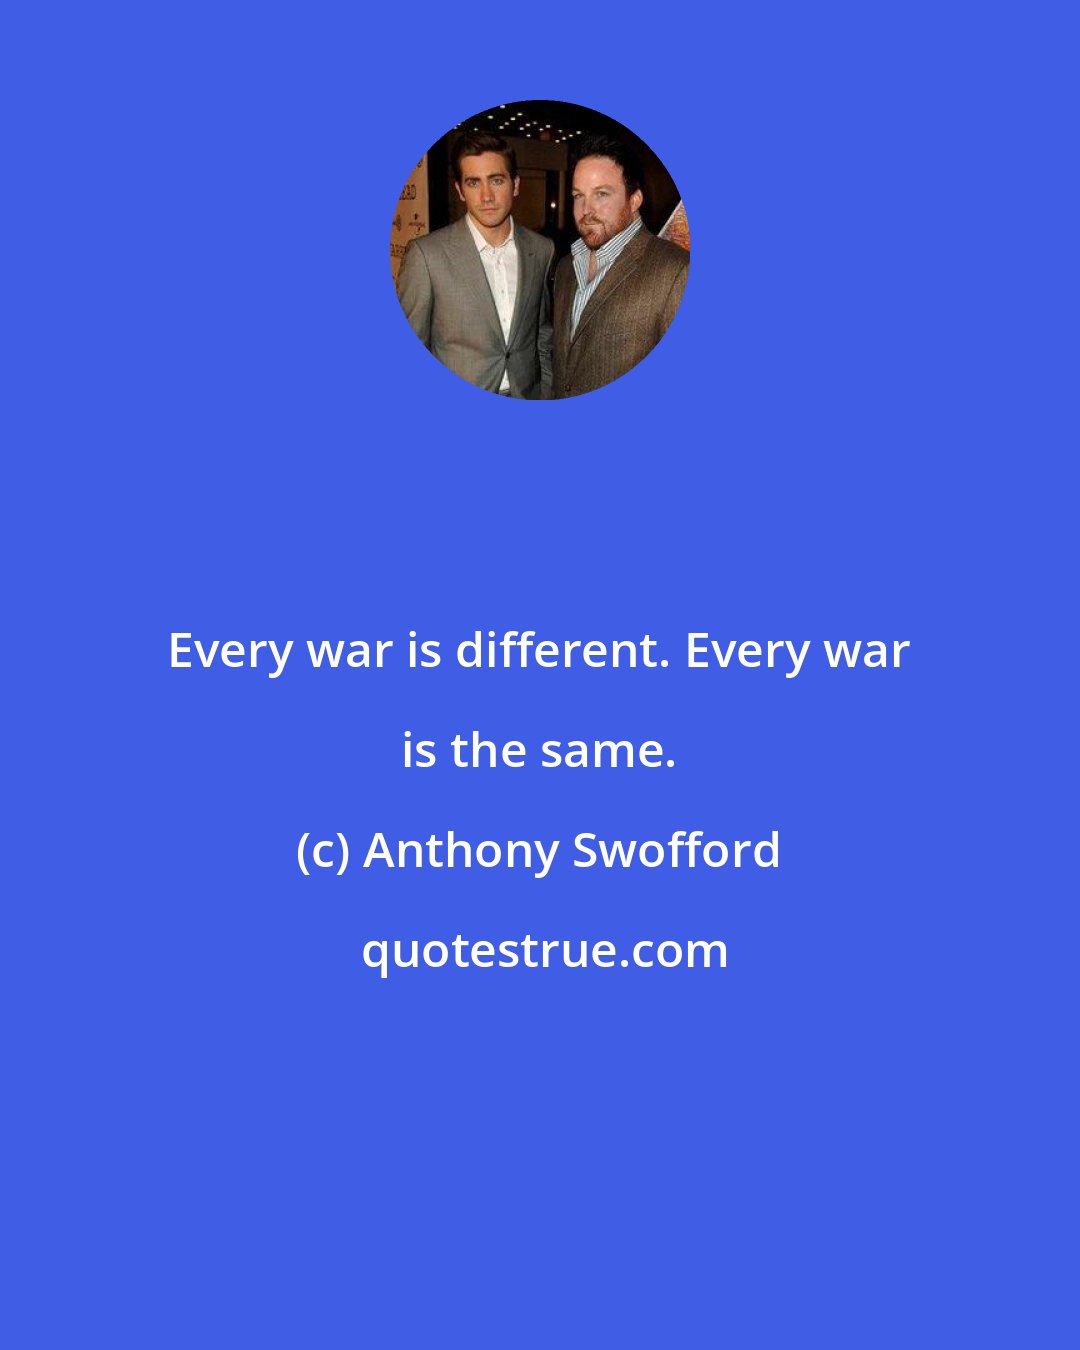 Anthony Swofford: Every war is different. Every war is the same.